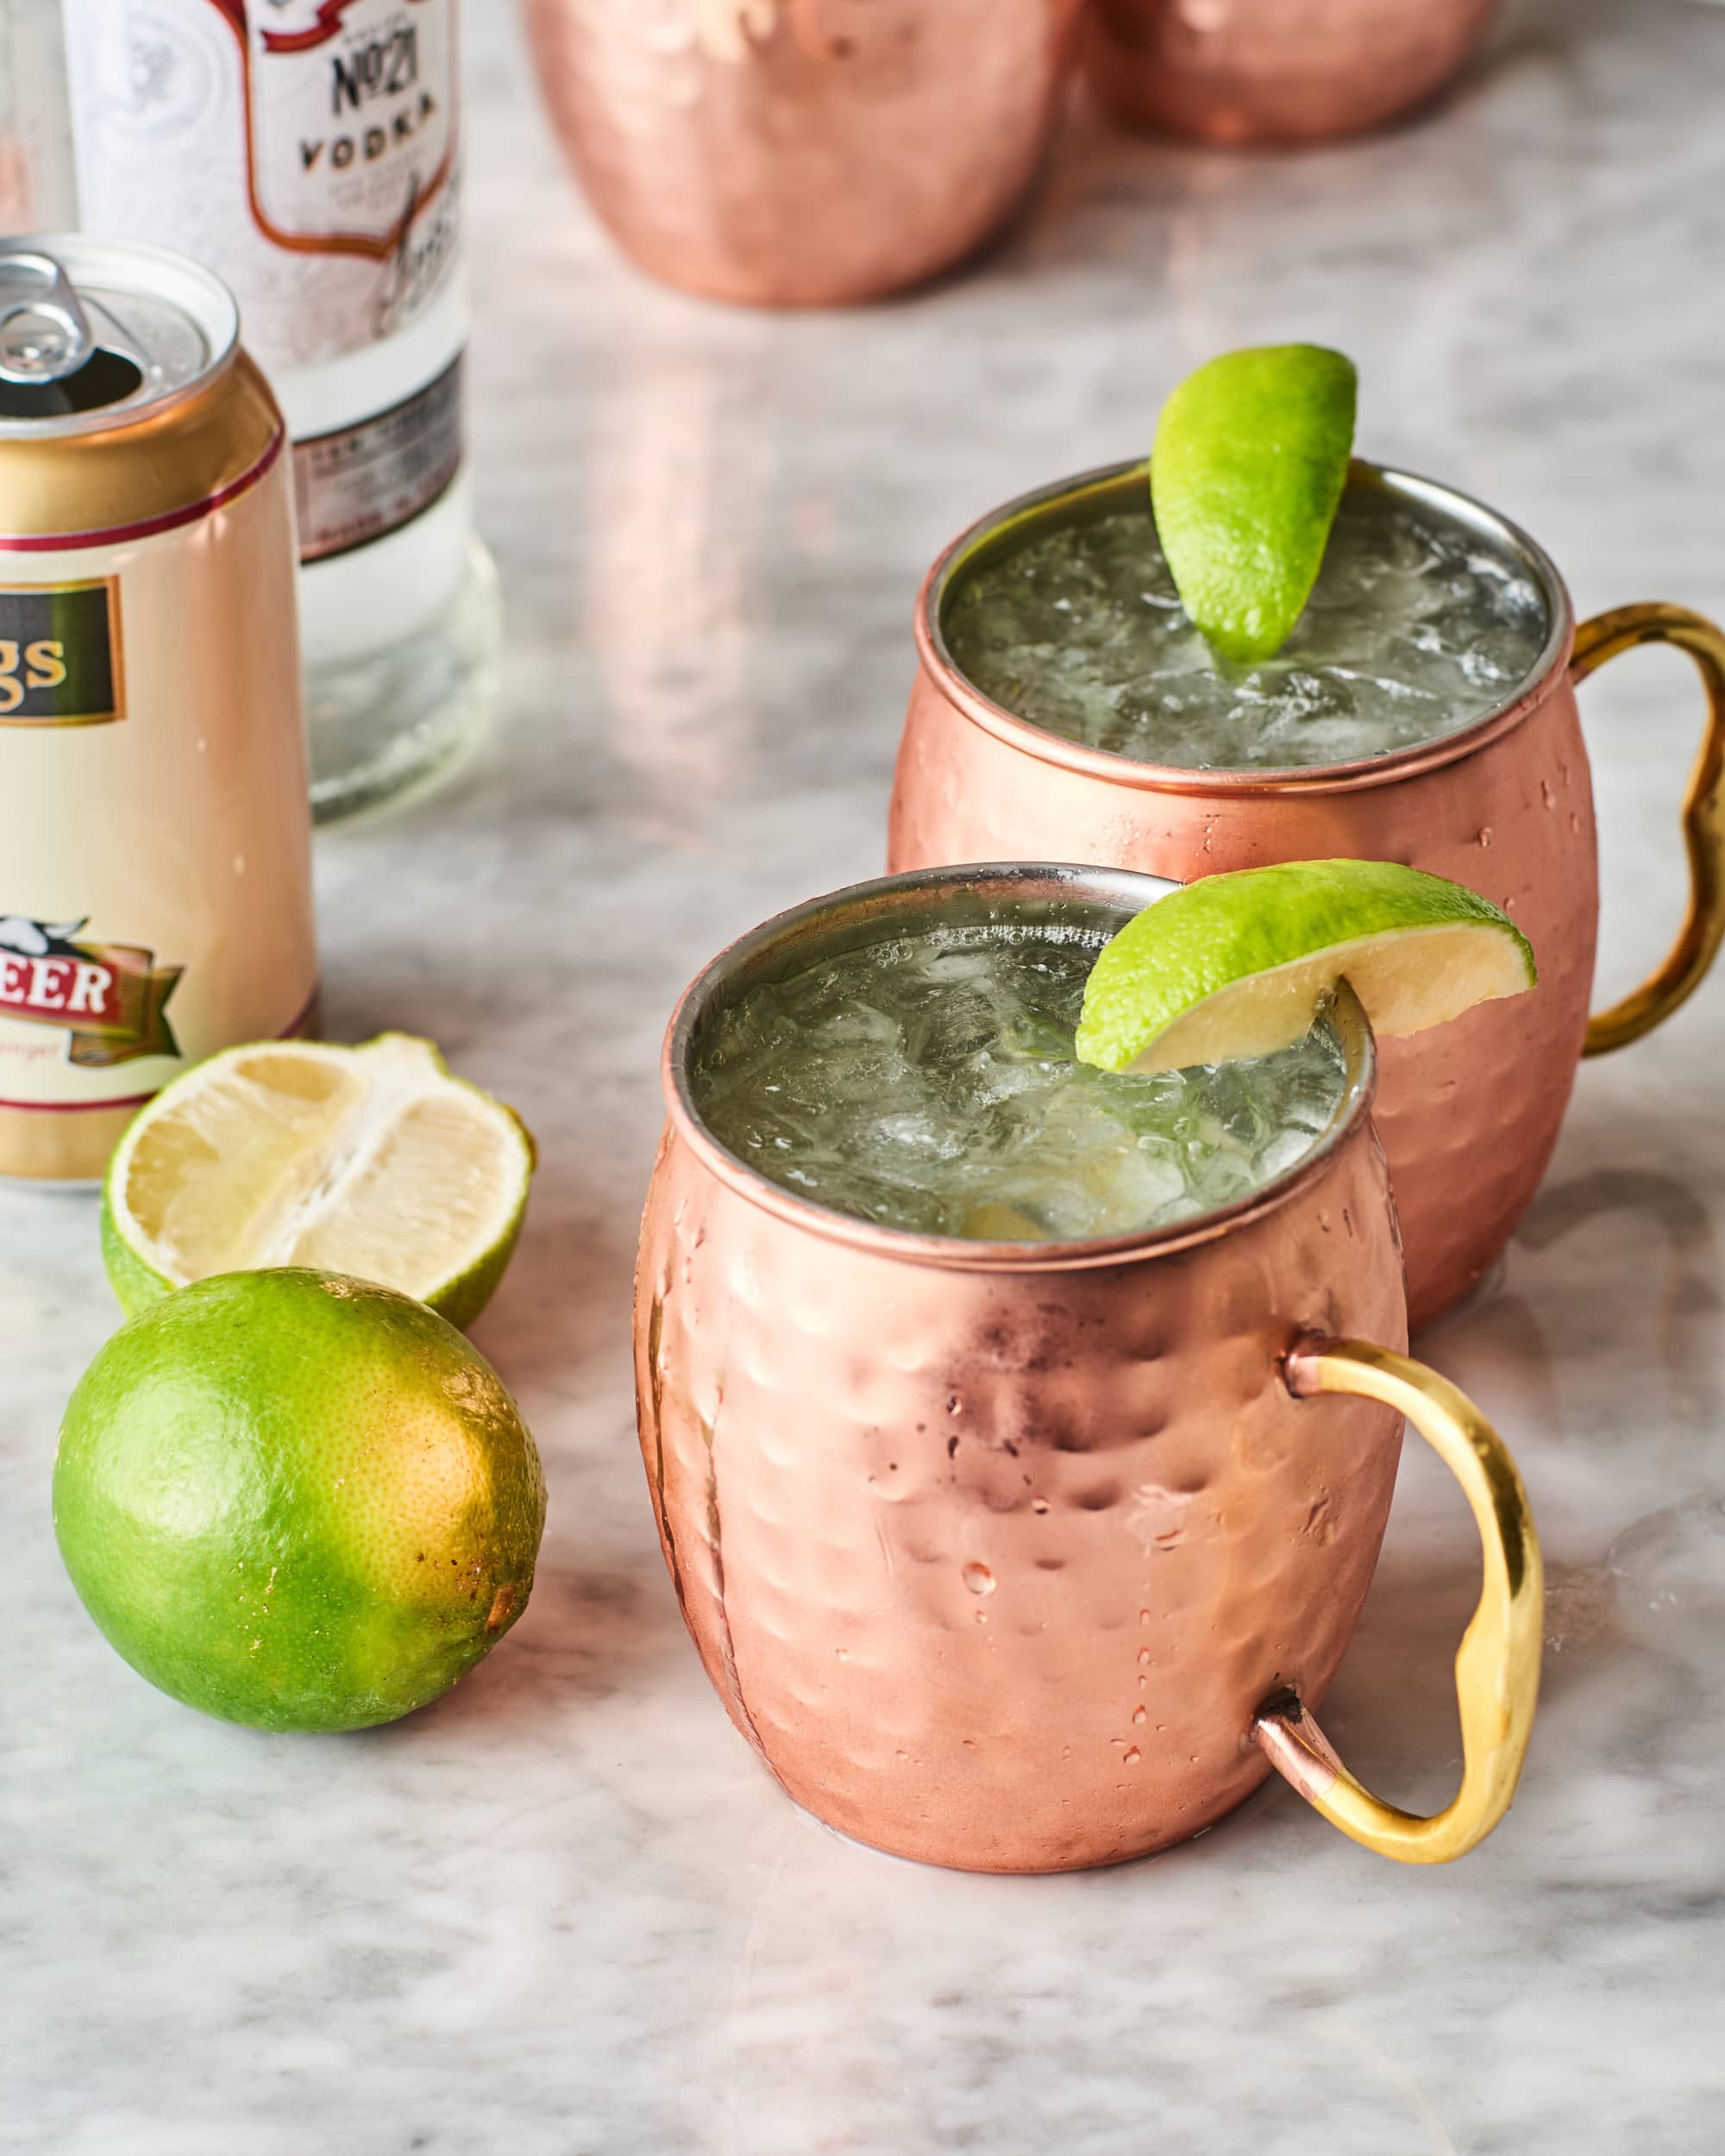 Best Moscow Mule Recipe - How to Make Easy Moscow Mule Cocktail